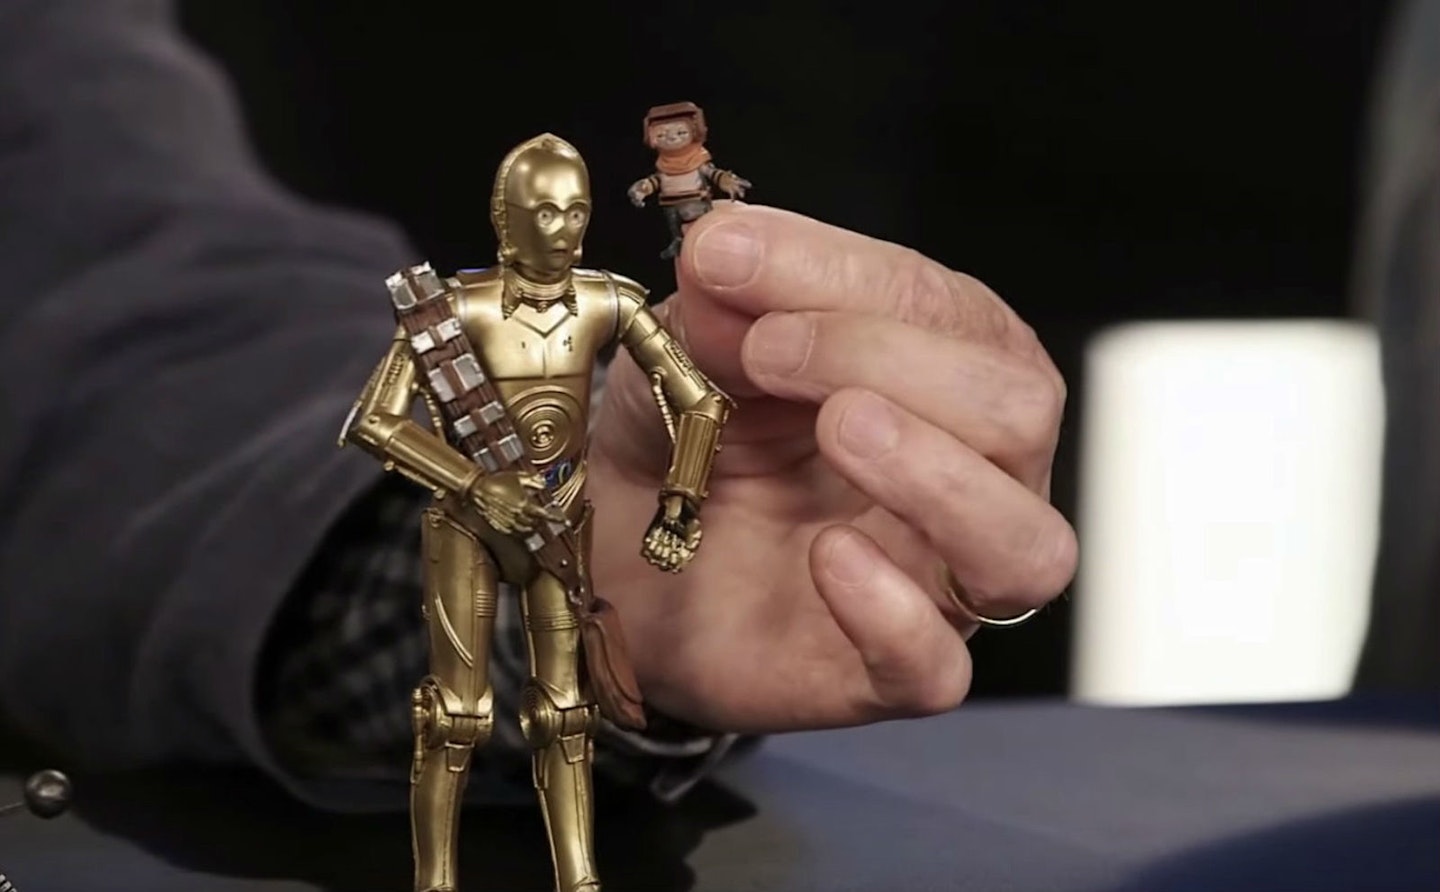 Star Wars: The Rise Of Skywalker Babu Frik and C-3PO toys